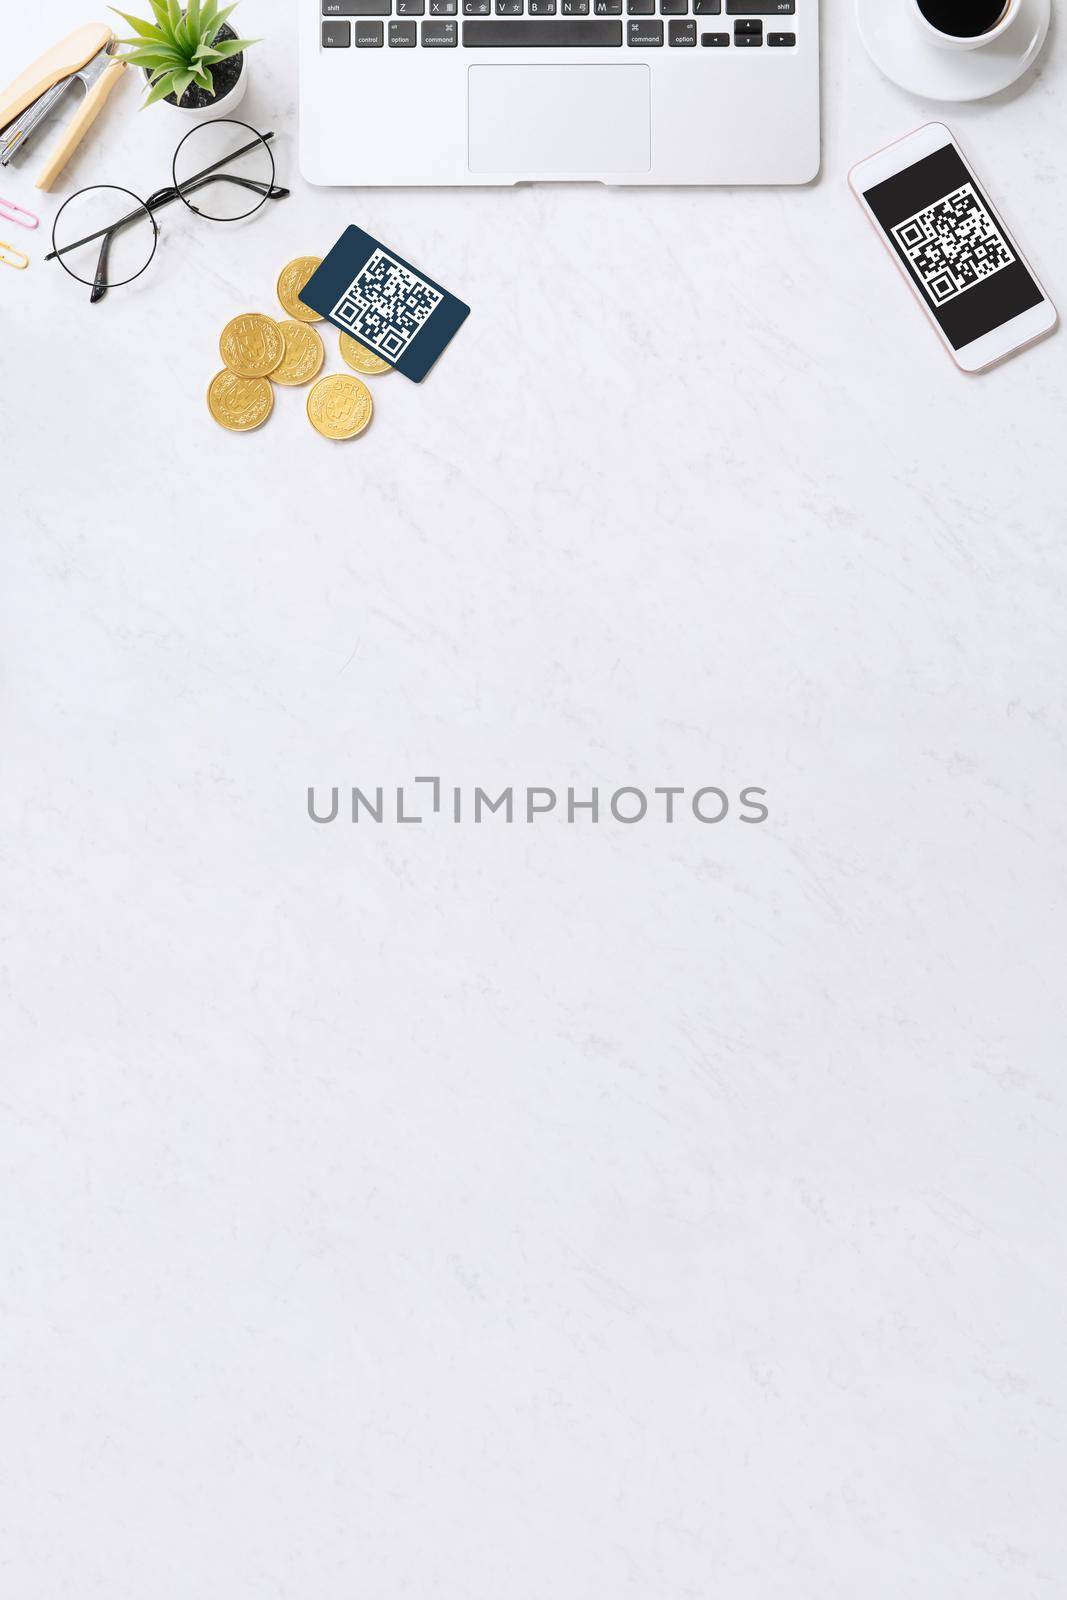 Online payment with QR code concept, virtual credit card, smart phone on office laptop desk on clean marble table background, top view, flat lay by ROMIXIMAGE